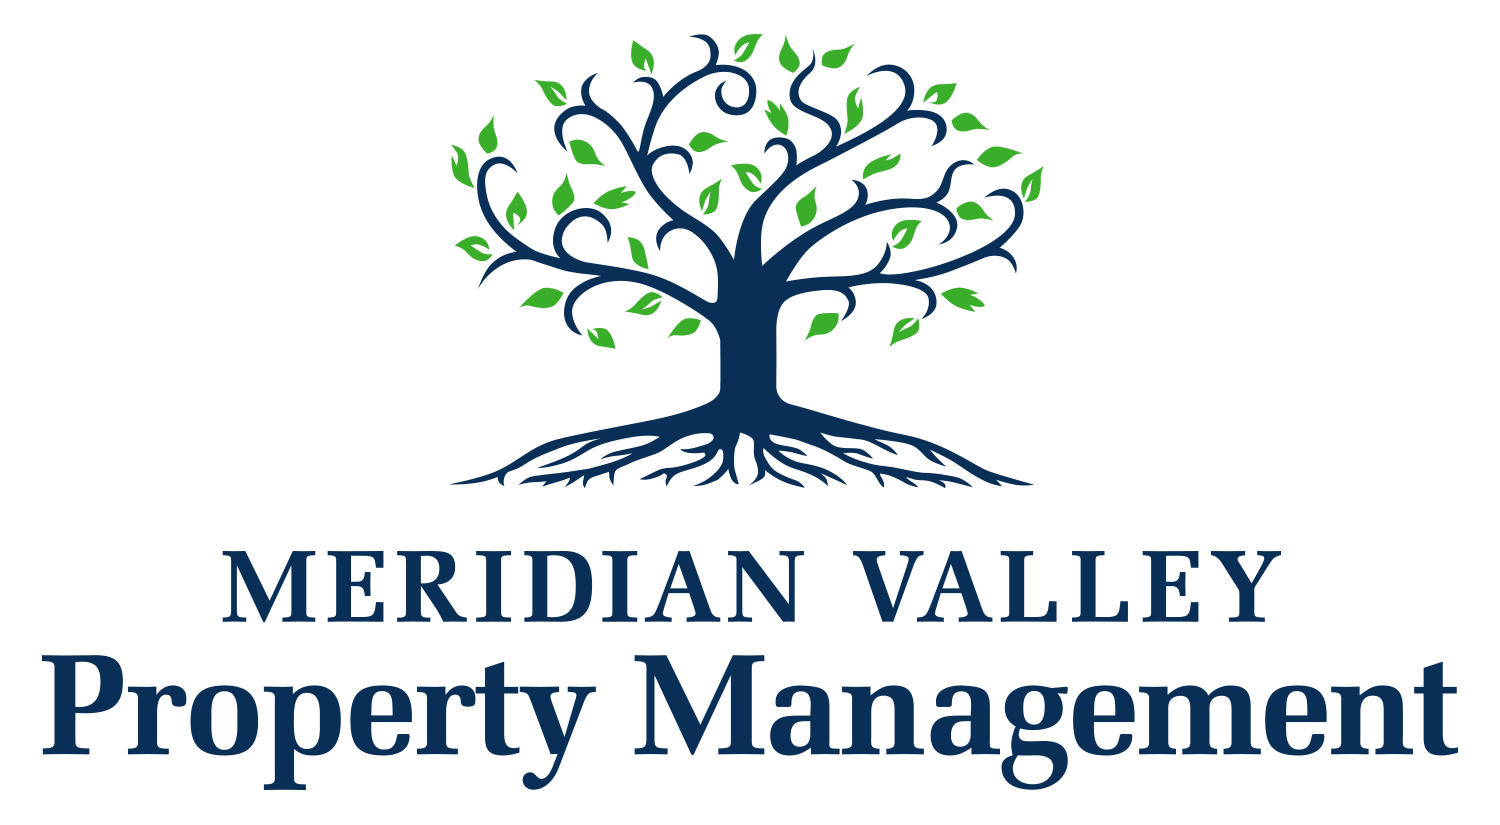 Meridian Valley Property Management